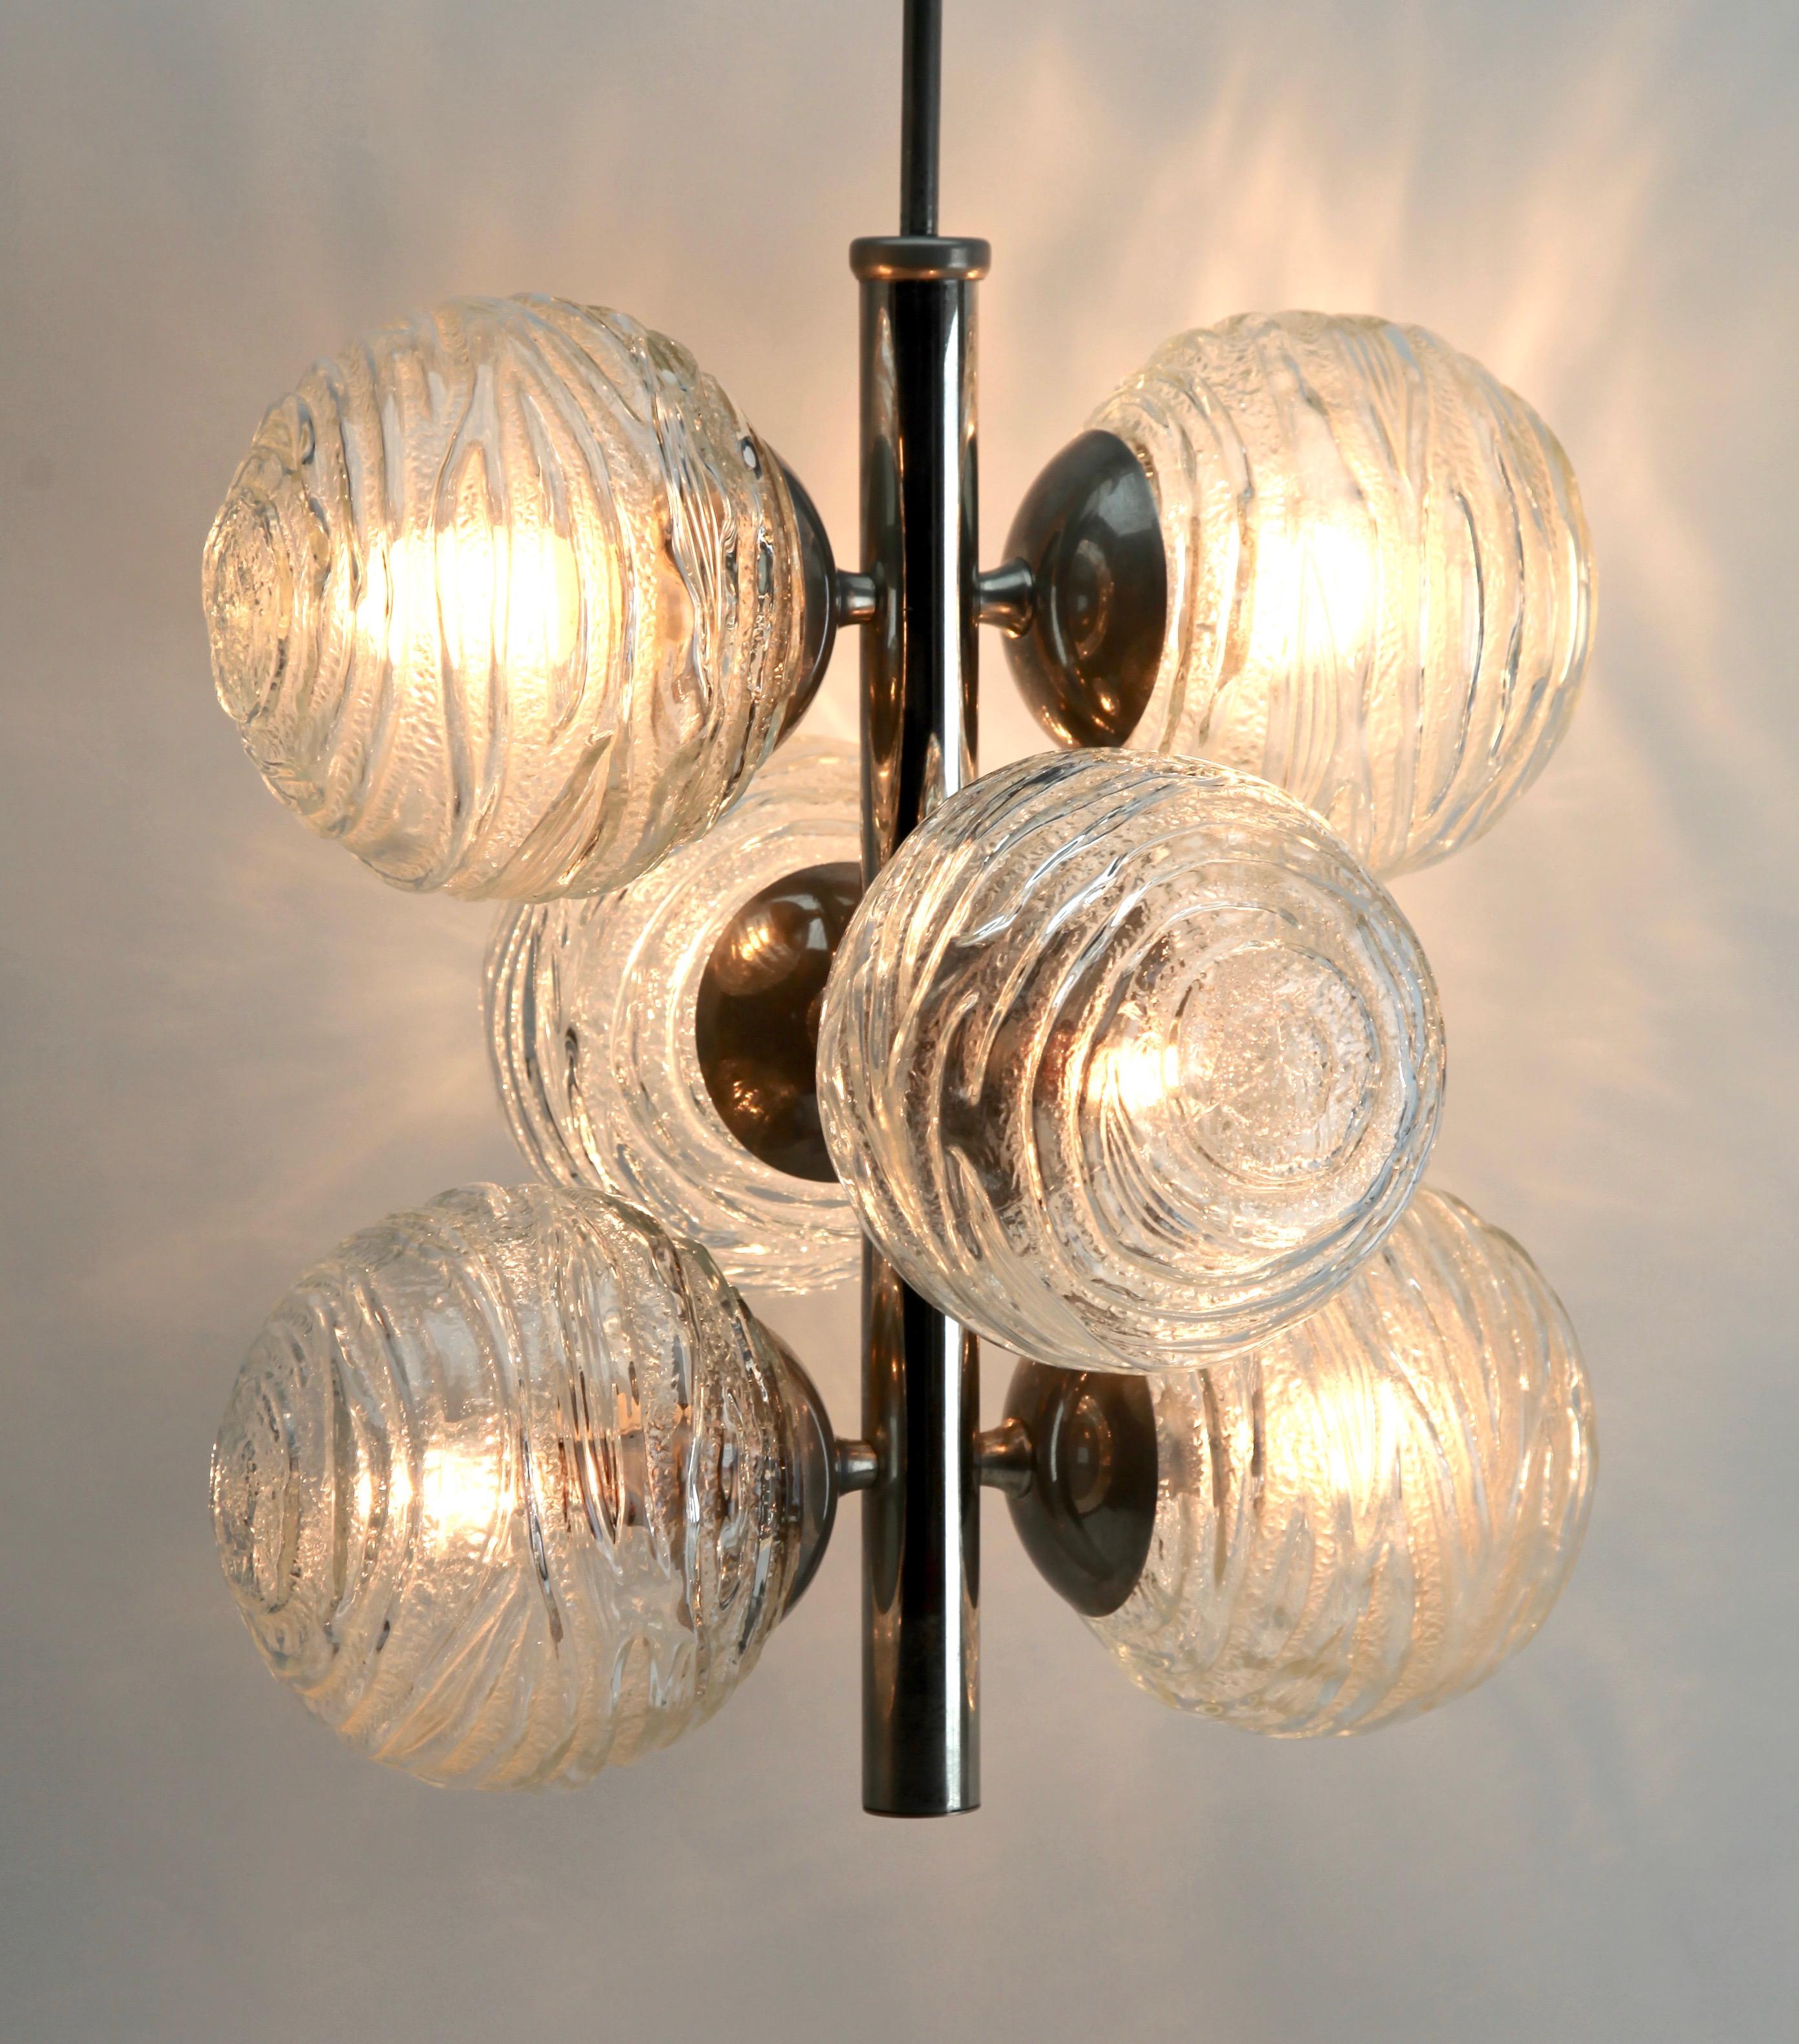 Hand-Crafted Fischer Leuchten ‘Germany’ Swirl Ball Pendant Stem Lamp with 6 Globular Lights For Sale